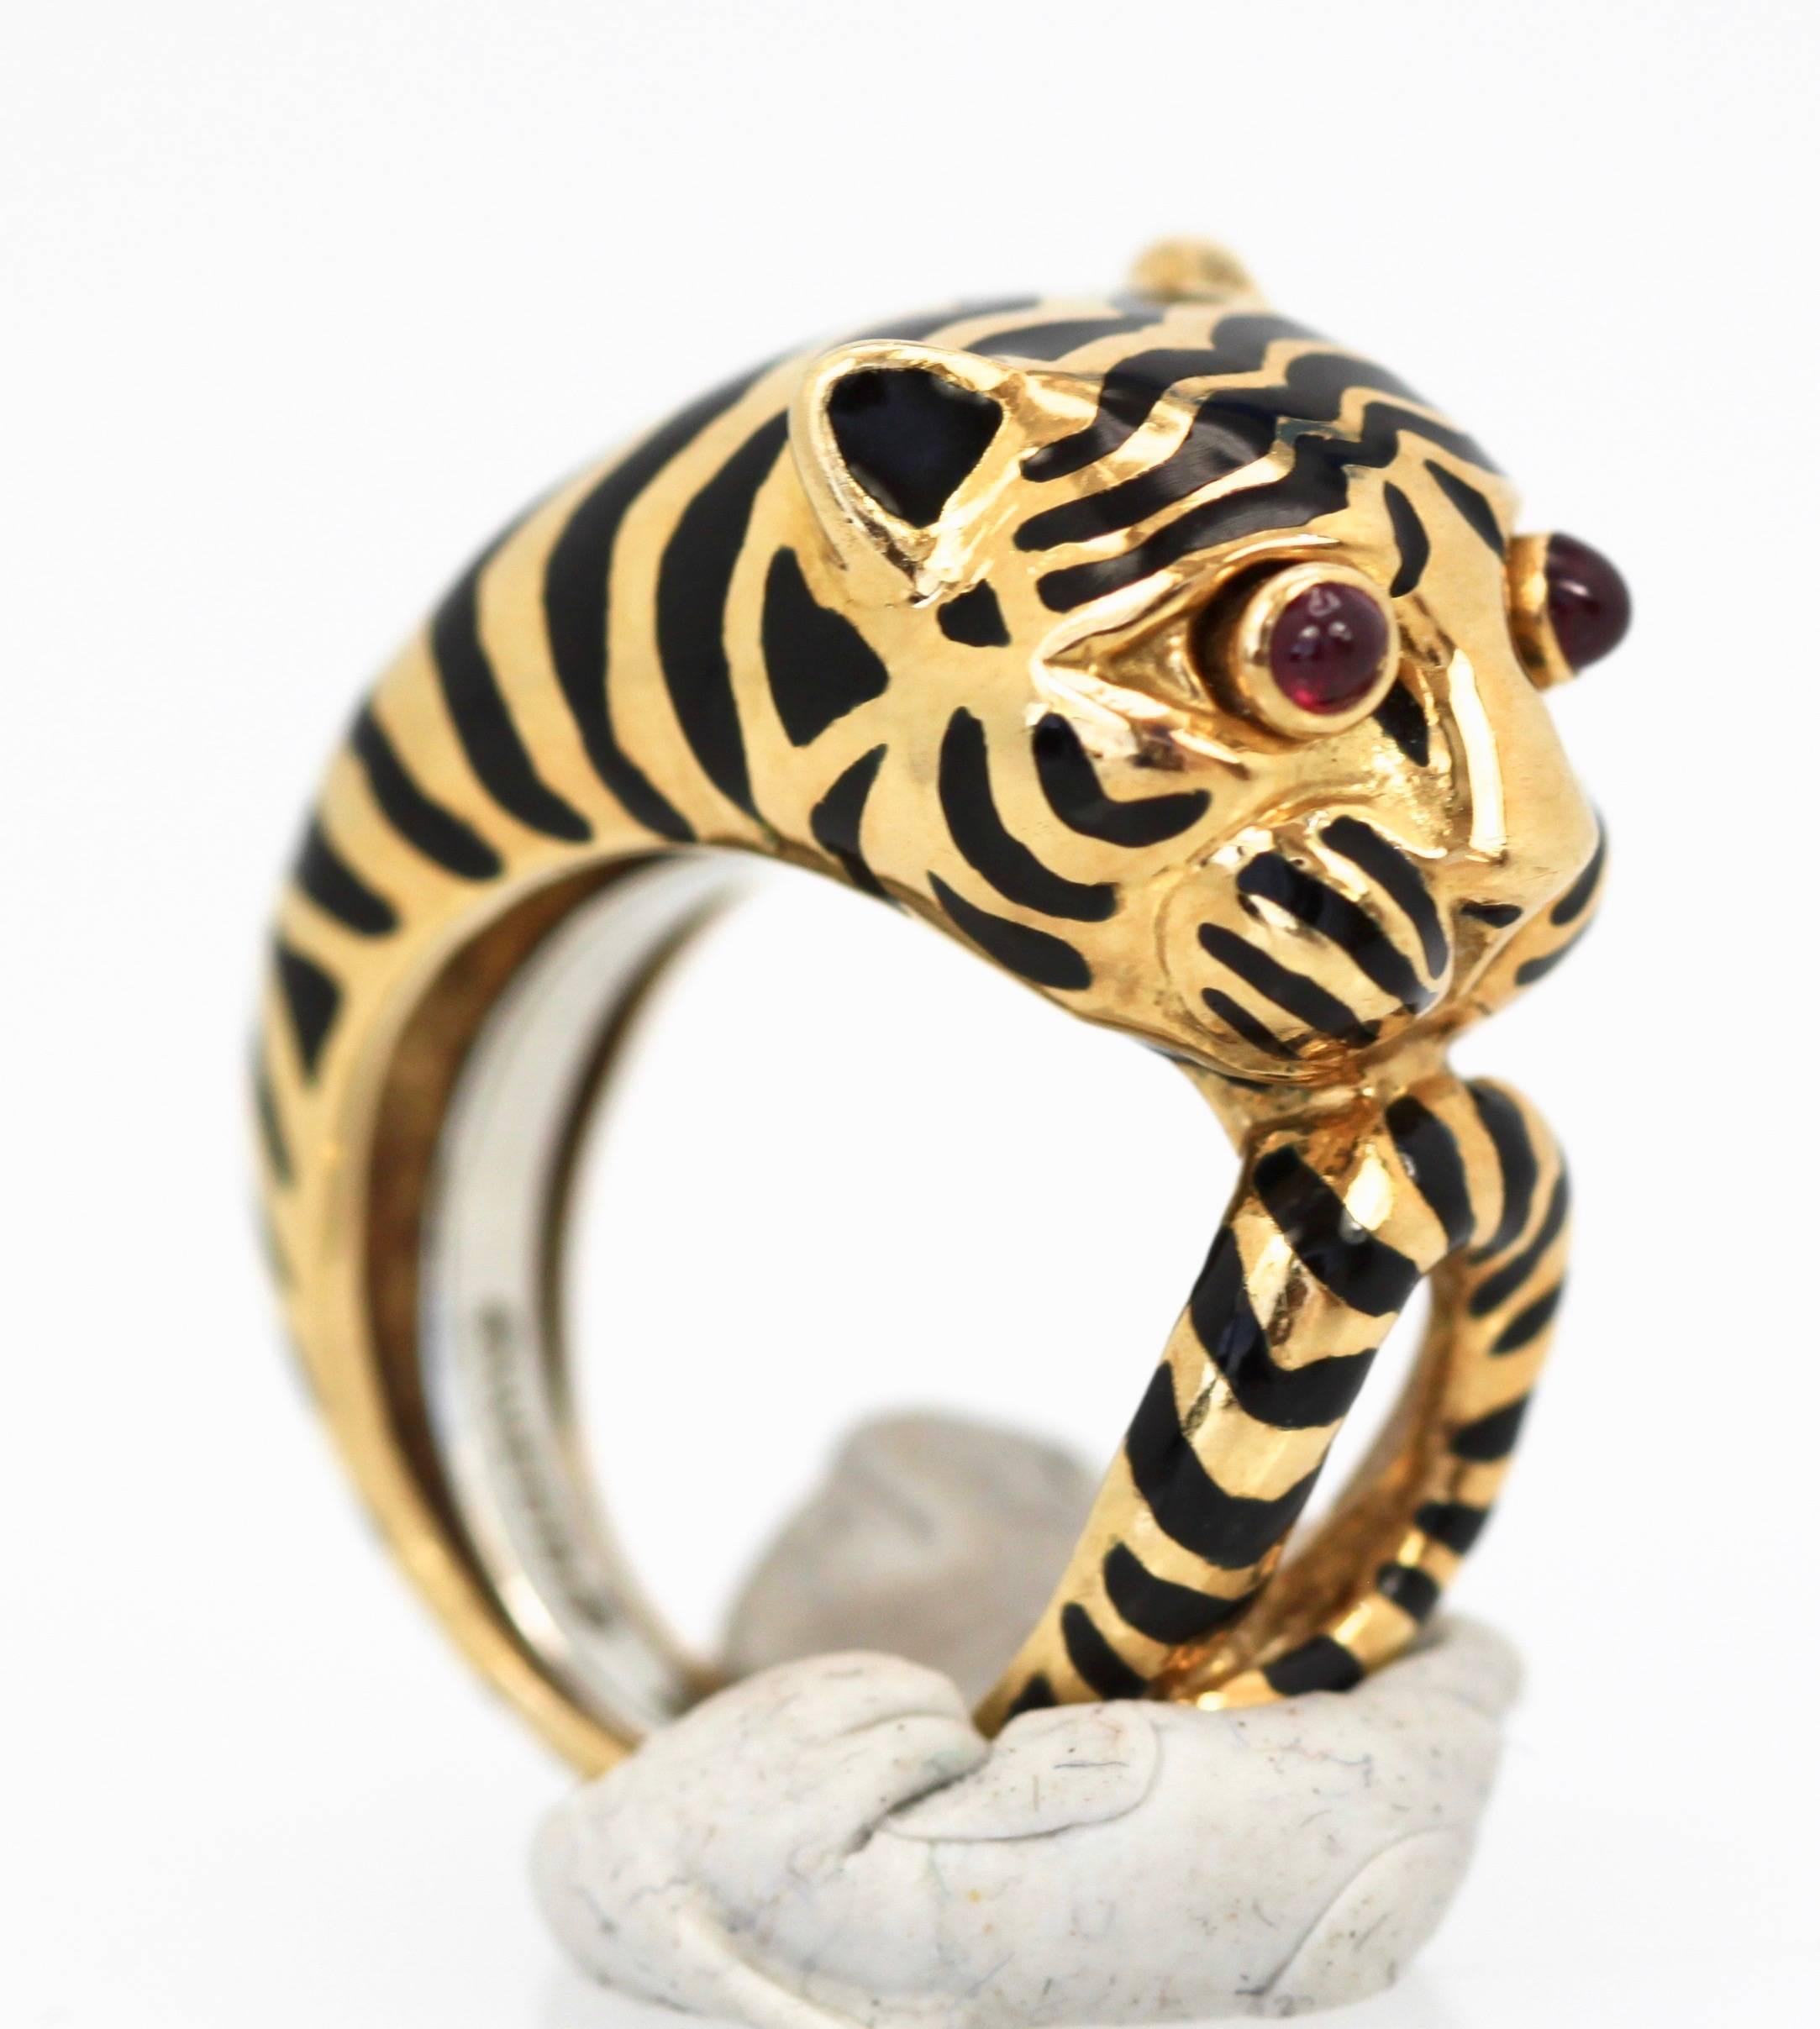 This gorgeous David Webb ring is from the animal collection and is currently selling and in current production. It is a beauty the black enamel stripes are in very very good condition with just a bit of enamel loss on one spot which is not